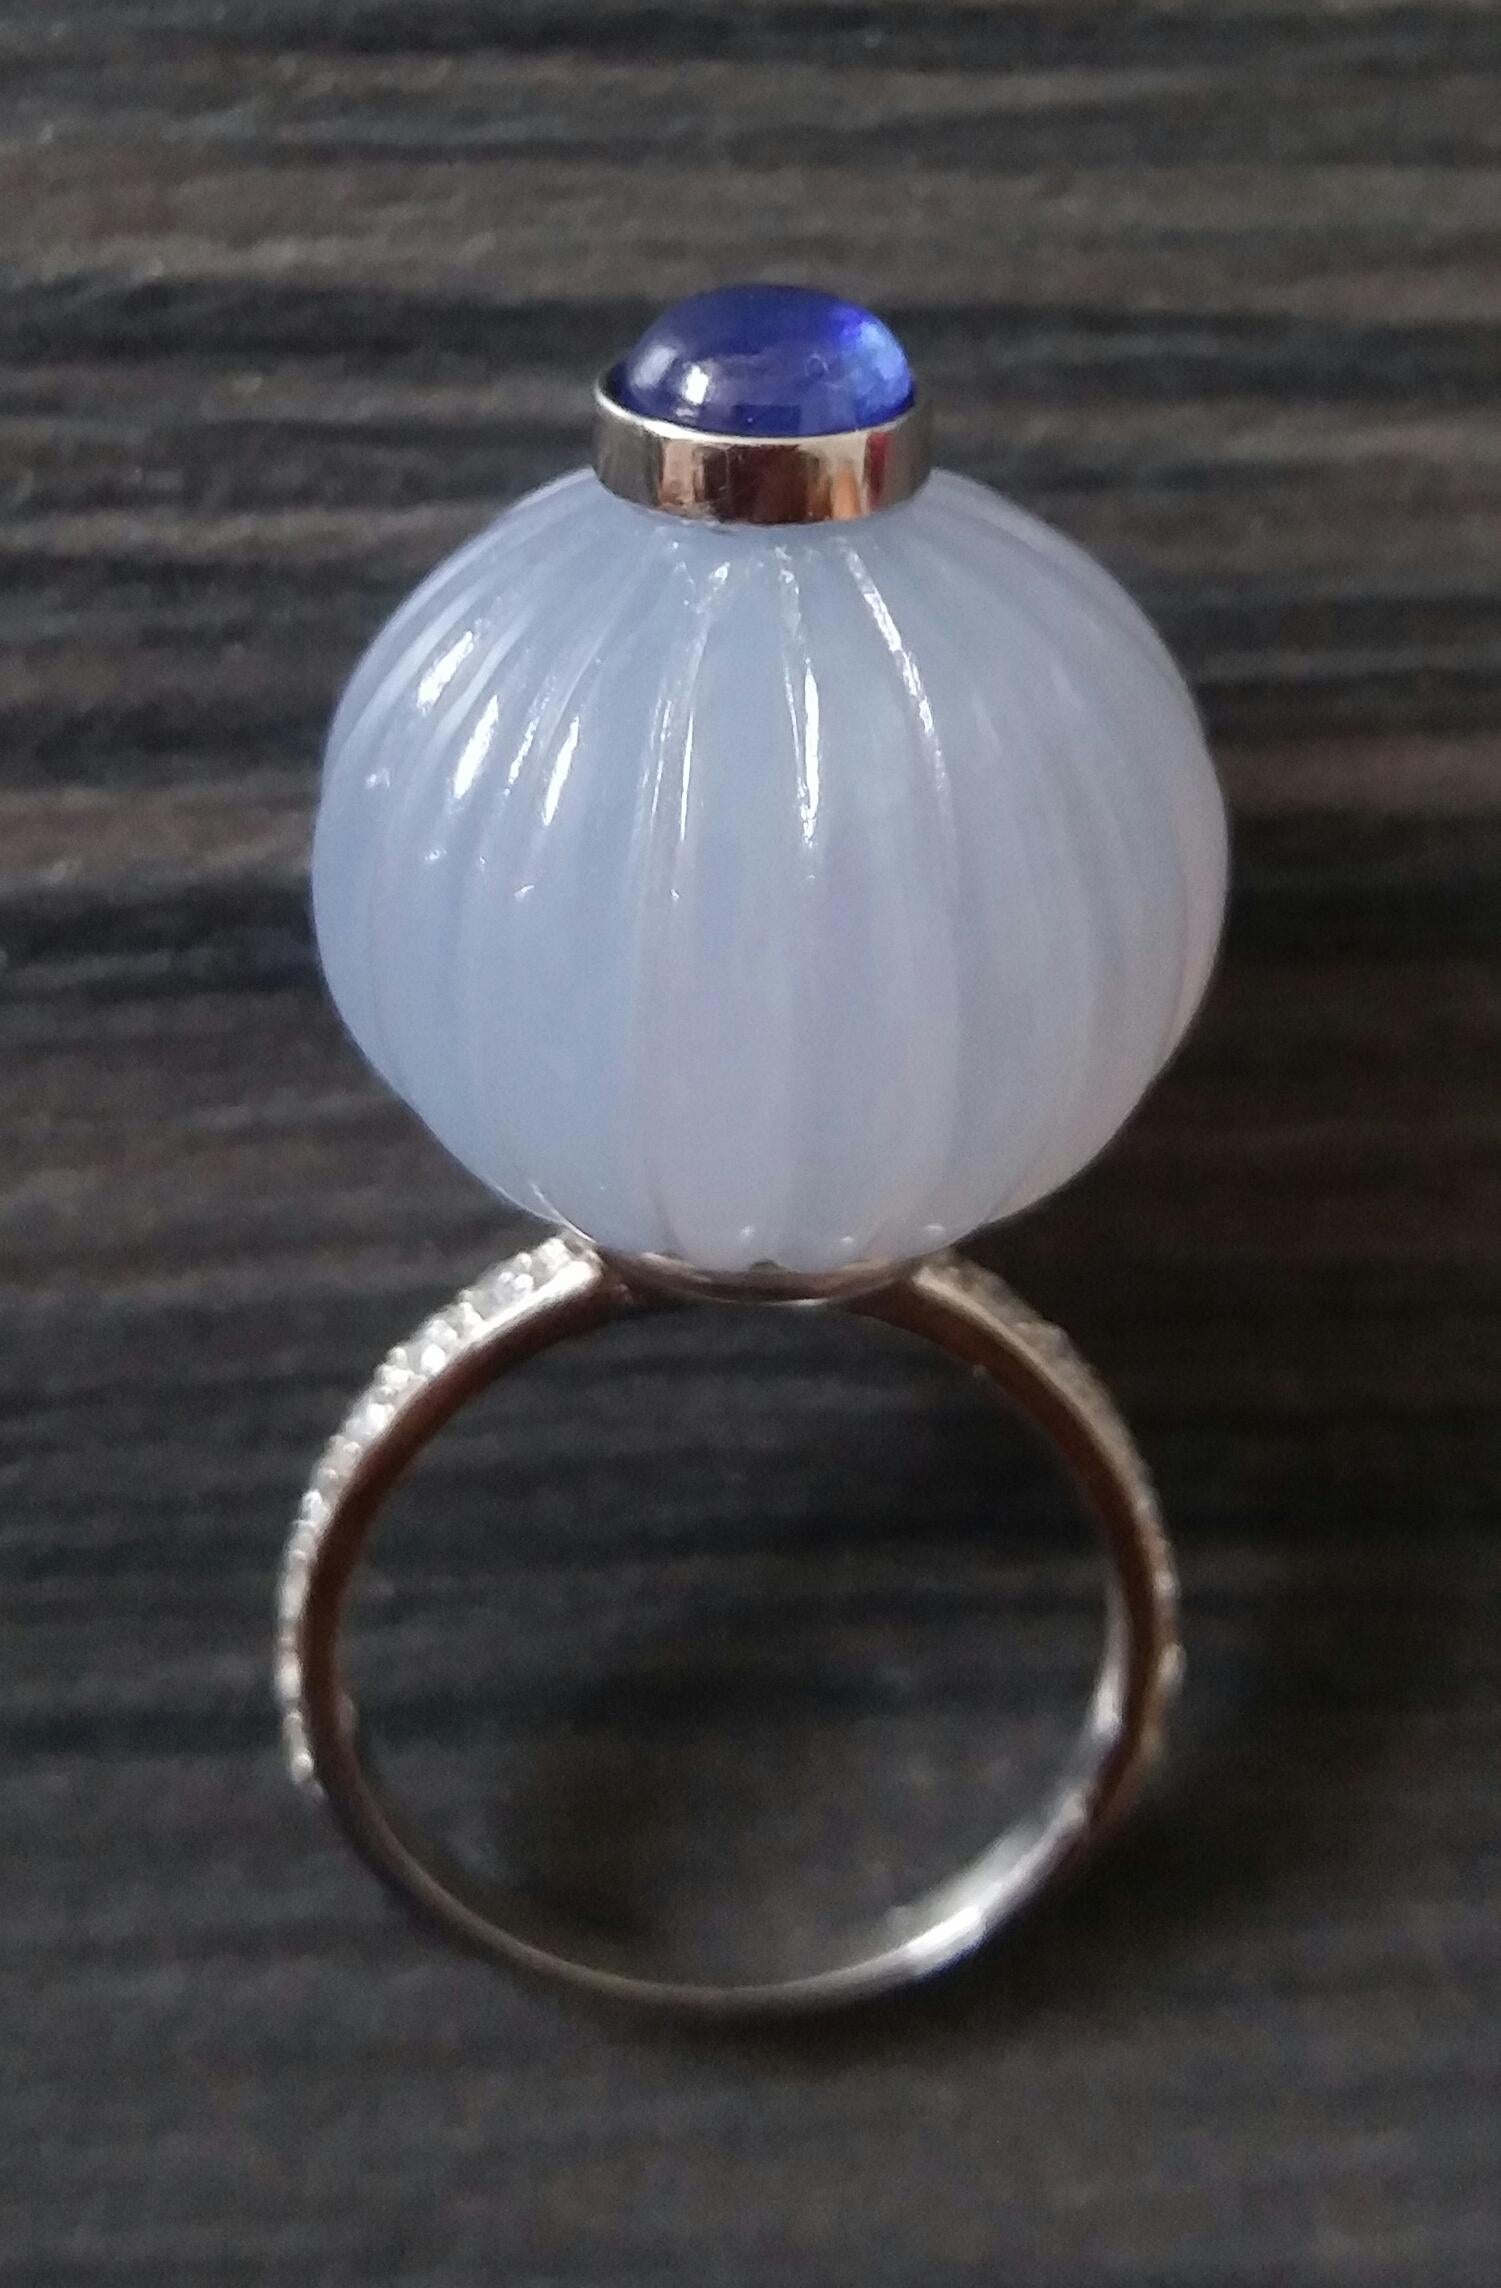 
Melon cut Chalcedony Round Bead of 20 mm. in diameter and 16 mm. thick with in the center a round Blue Sapphire cabochon of 7 mm. in diameter set in 14 kt white gold is mounted on top of a 14 Kt. white gold and 14 diamonds shank ( actual size #7,